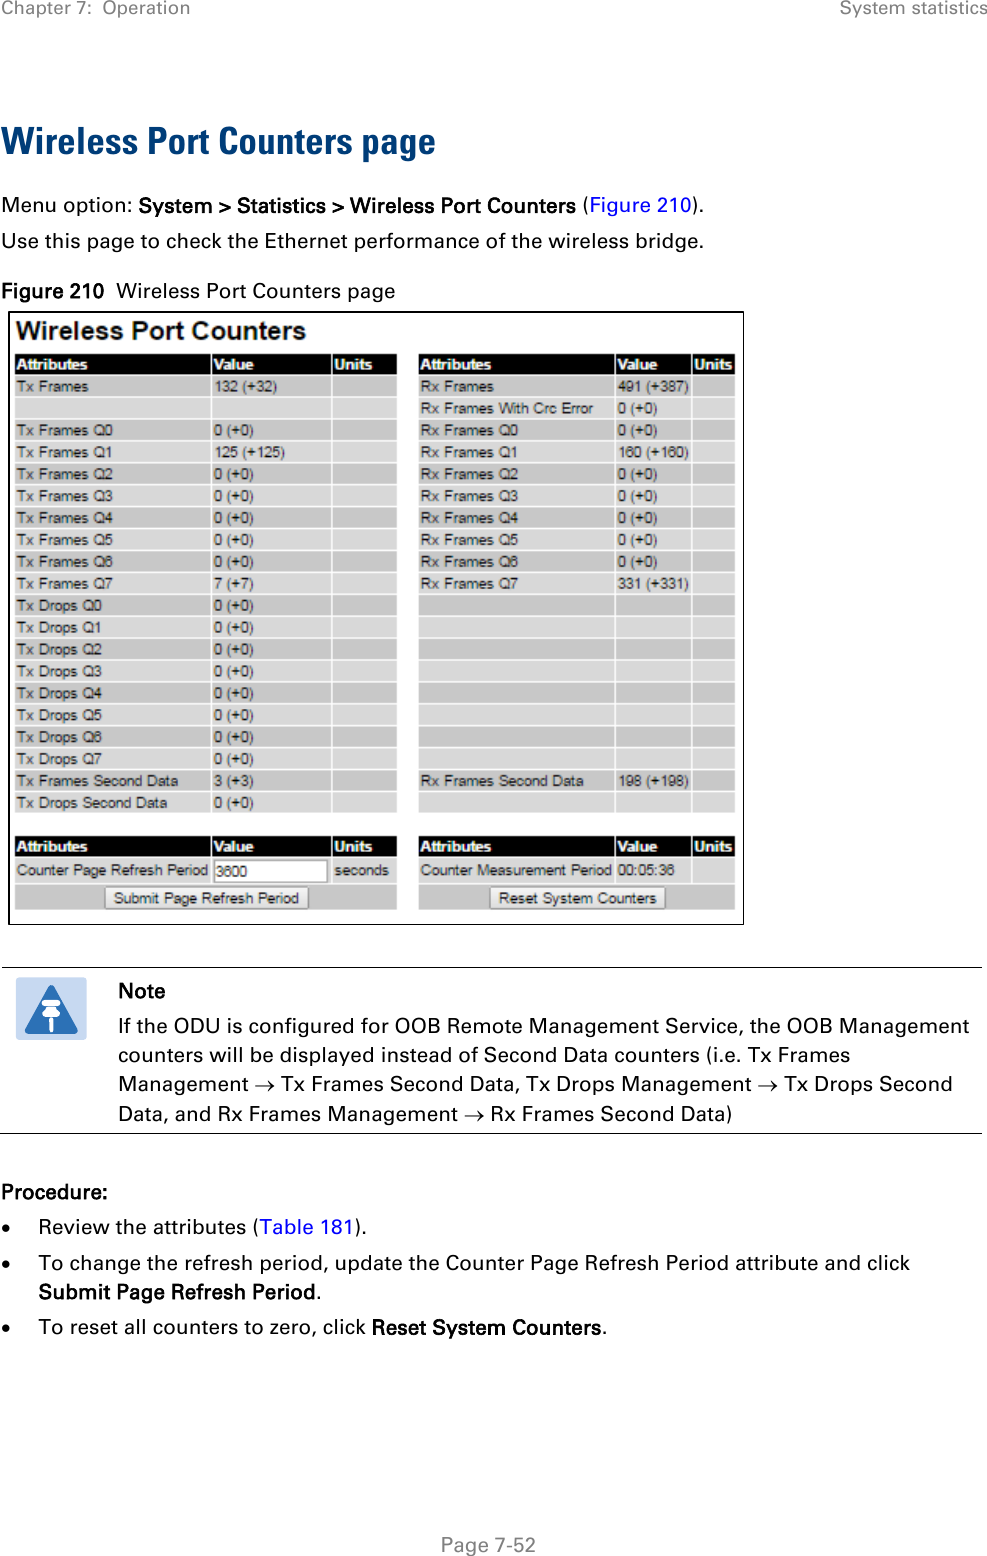 Chapter 7:  Operation System statistics  Wireless Port Counters page Menu option: System &gt; Statistics &gt; Wireless Port Counters (Figure 210). Use this page to check the Ethernet performance of the wireless bridge. Figure 210  Wireless Port Counters page      Note If the ODU is configured for OOB Remote Management Service, the OOB Management counters will be displayed instead of Second Data counters (i.e. Tx Frames Management → Tx Frames Second Data, Tx Drops Management → Tx Drops Second Data, and Rx Frames Management → Rx Frames Second Data)  Procedure: • Review the attributes (Table 181). • To change the refresh period, update the Counter Page Refresh Period attribute and click Submit Page Refresh Period. • To reset all counters to zero, click Reset System Counters.      Page 7-52 